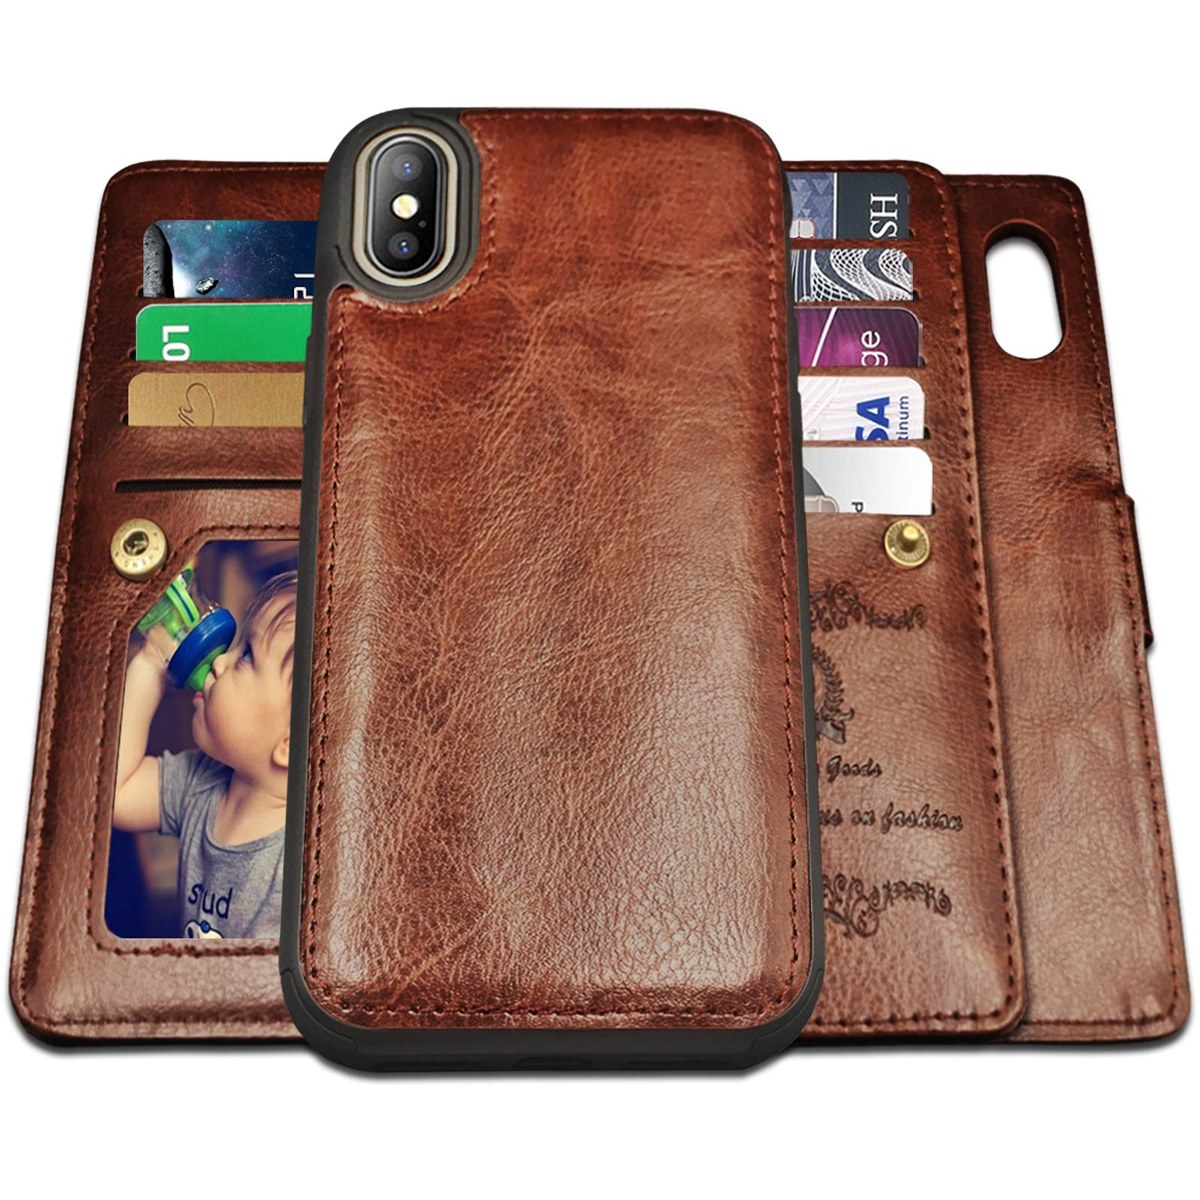 7-best-wallet-cases-for-iphone-xs-max